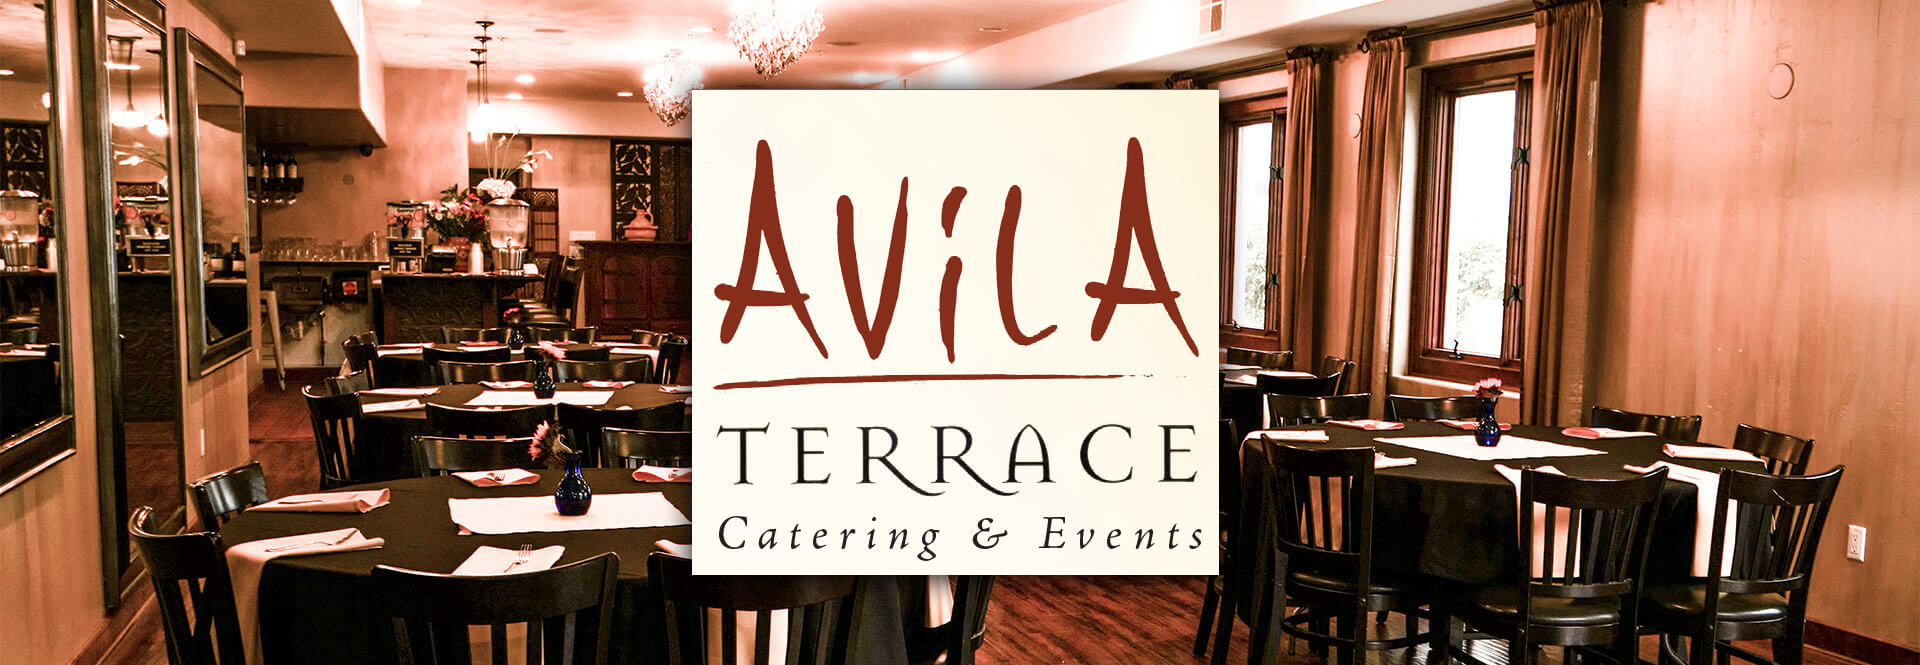 Avila Terrace Catering and Banquet Facilities in Downtown Riverside California